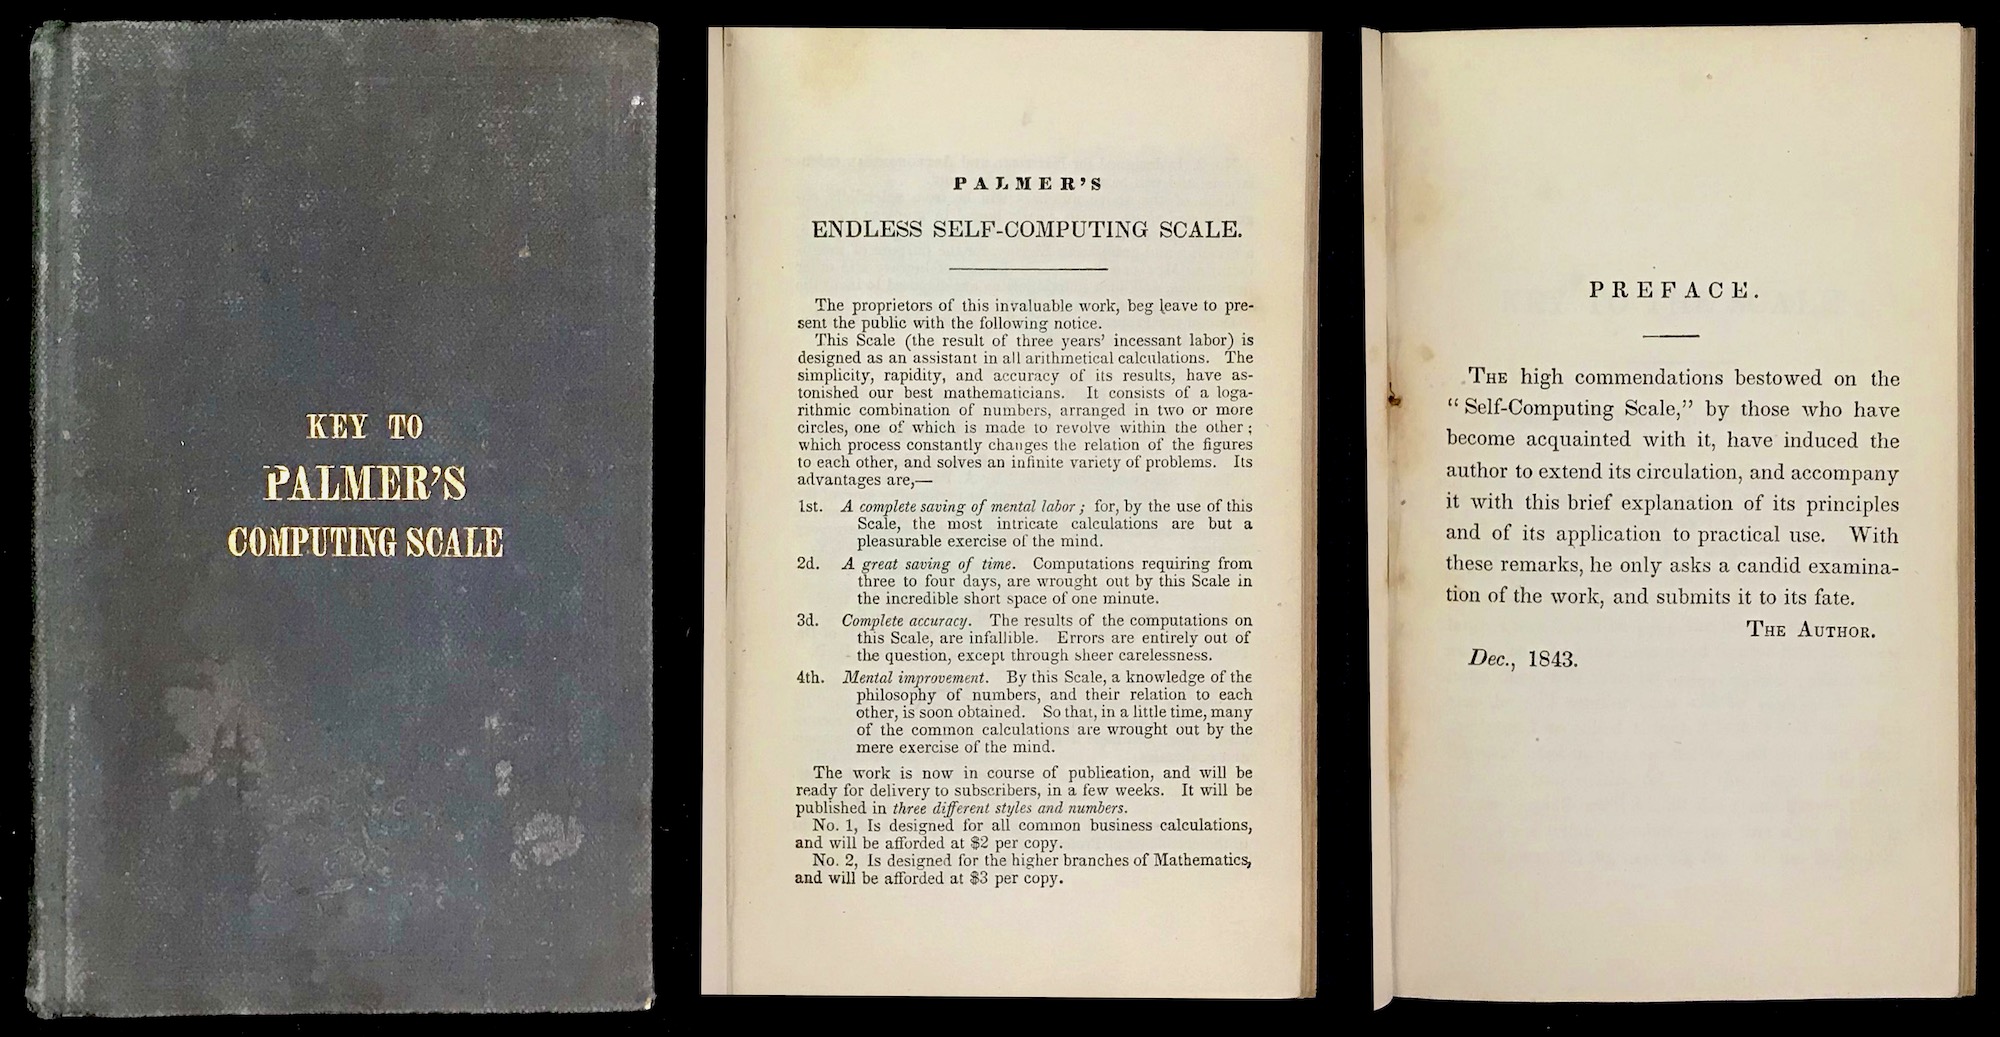 Key to Palmer’s Scale, an 1844 50-page instruction booklet. Left-to-Right are images of the cover, the Introduction, and the Preface of the book.